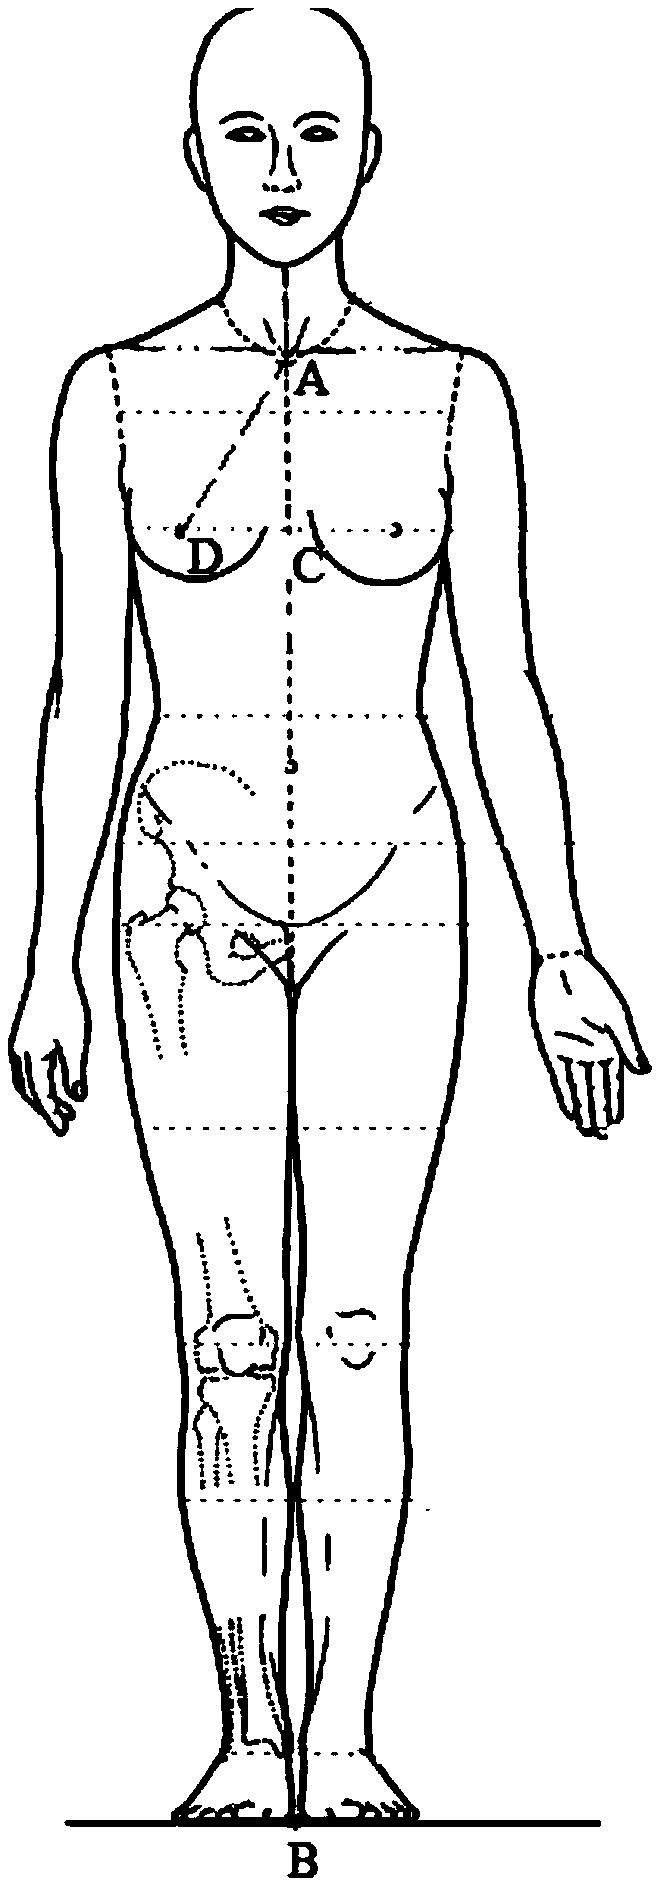 Human body measurement balance locator and method for measuring human body by balance positioning